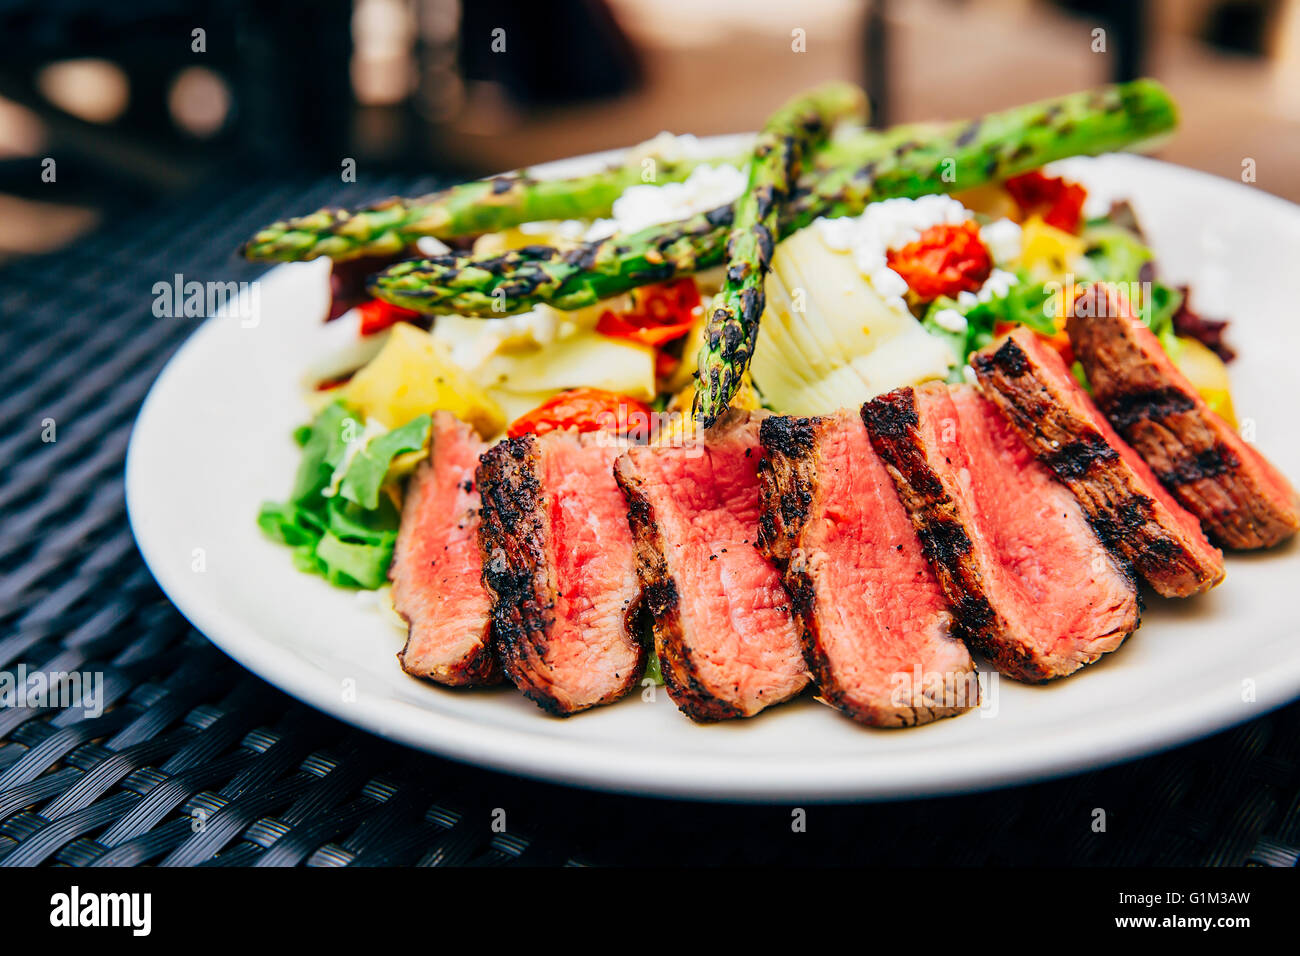 Plate of grilled meat and asparagus salad Stock Photo